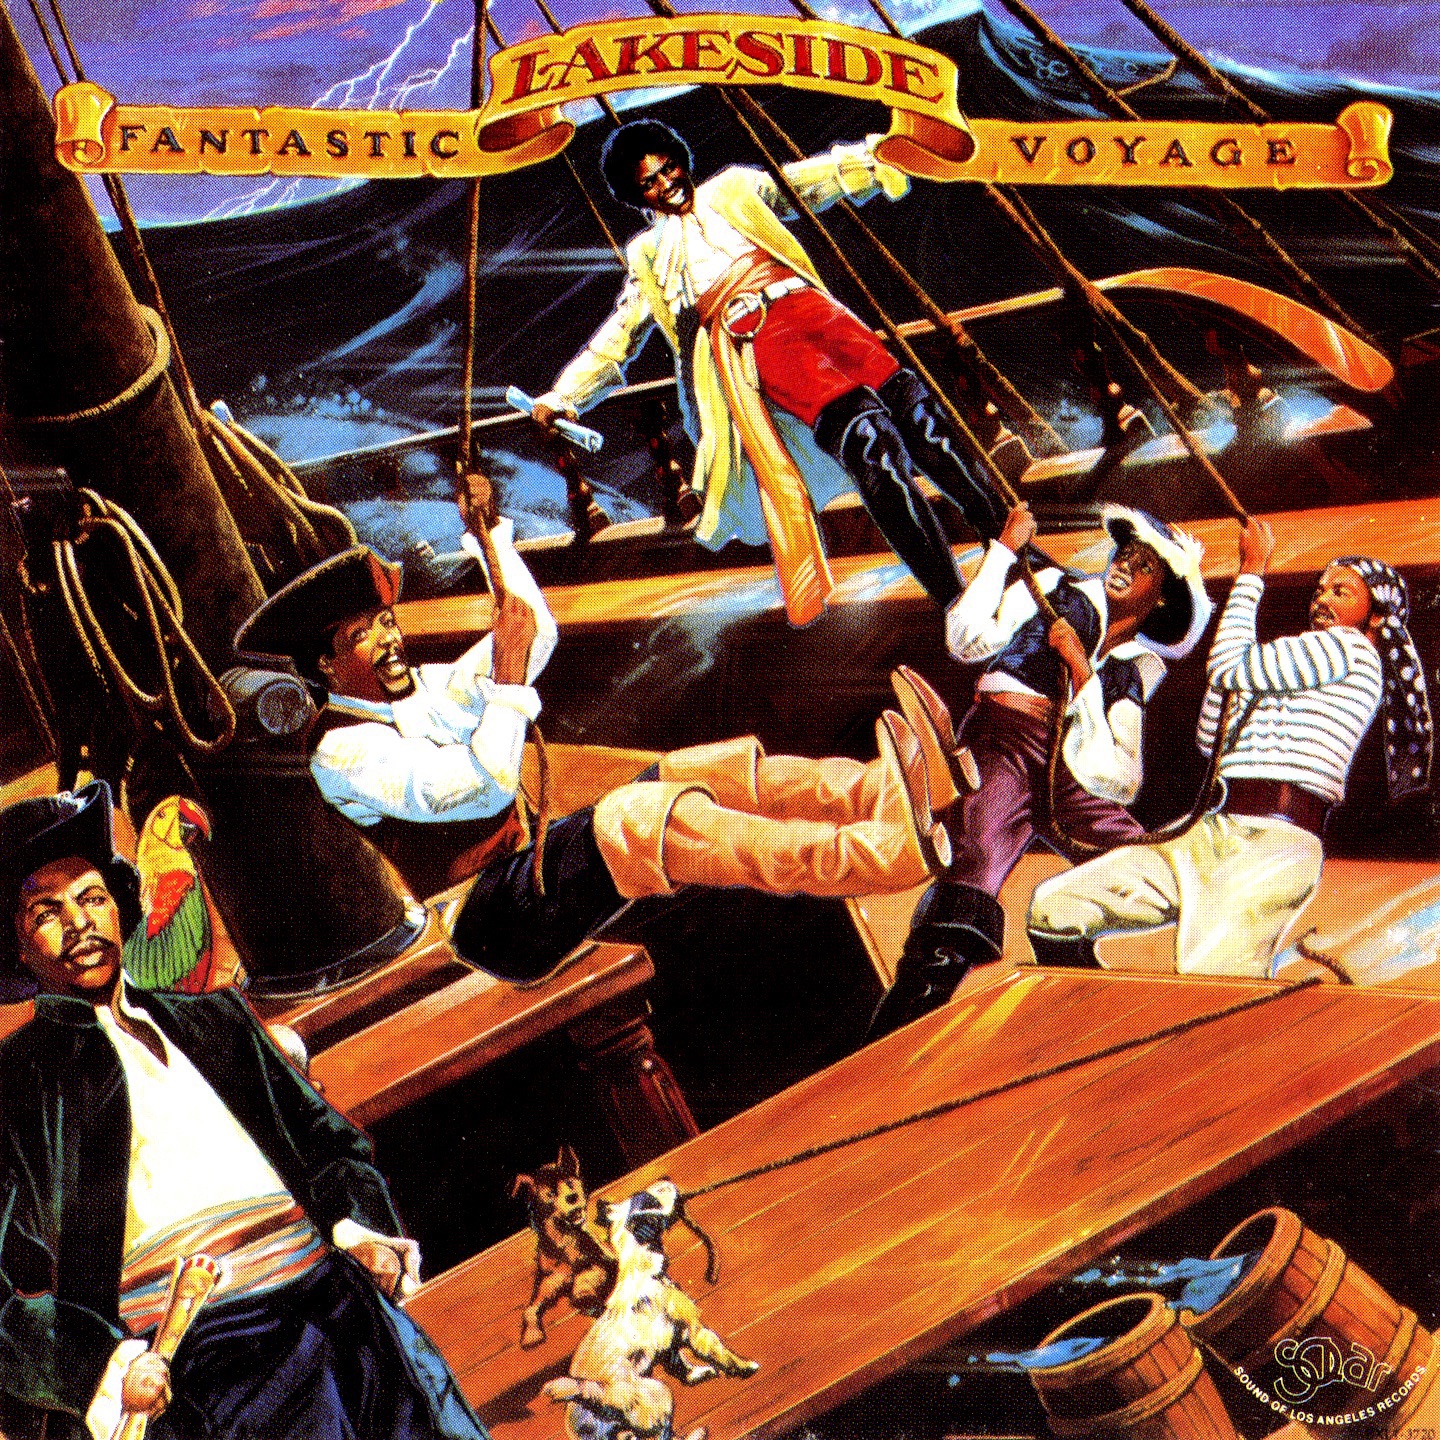 Art for Fantastic Voyage by Lakeside